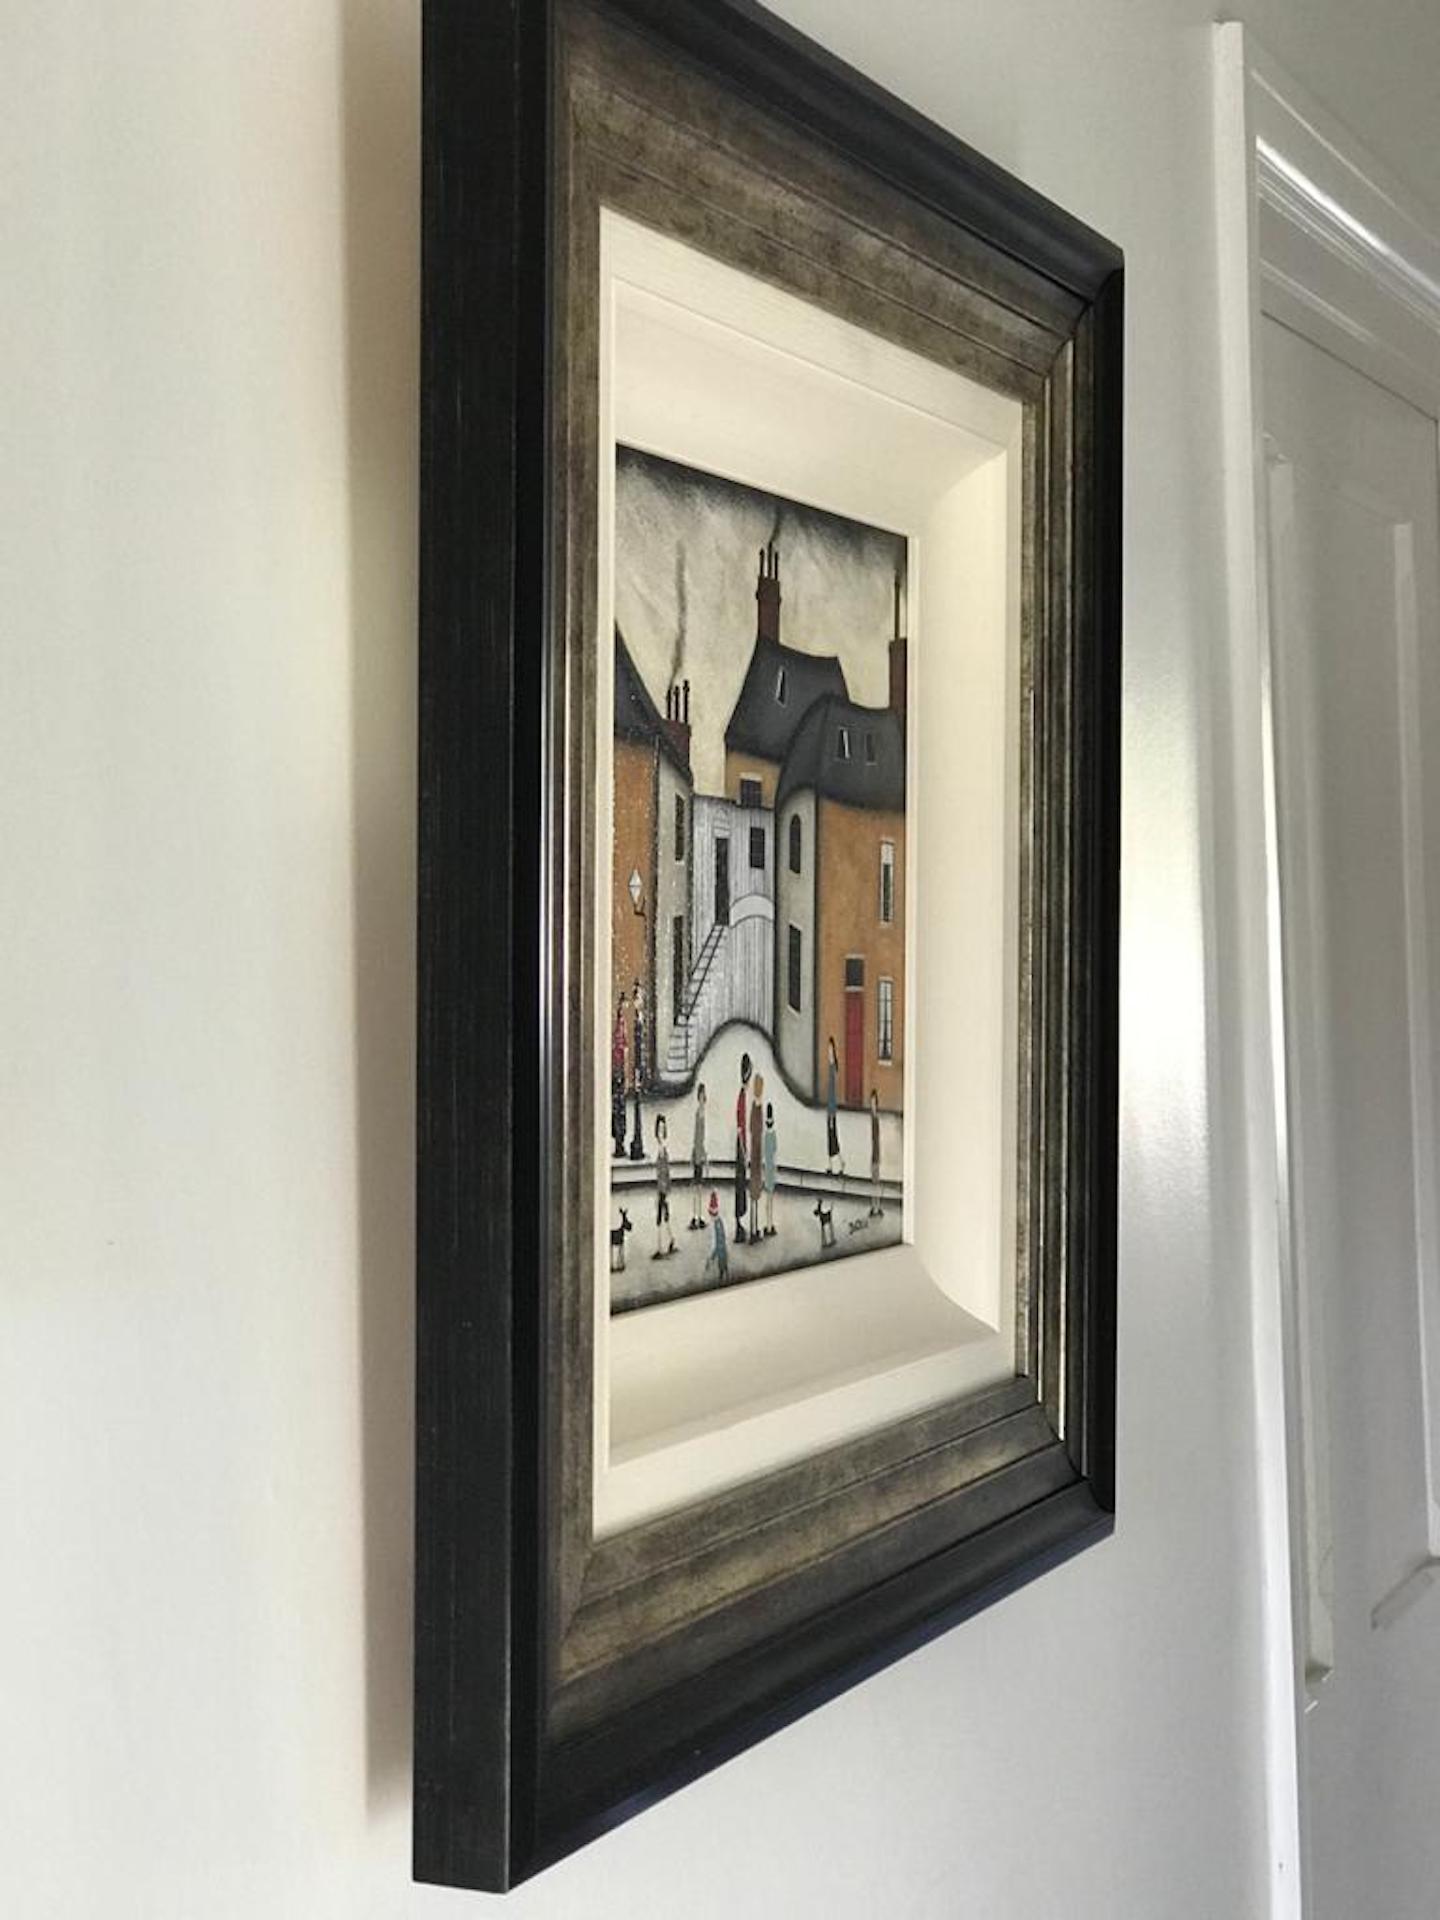 Sean Durkin
Village Life
Original Oil Painting
Oil Paint on Board
Image Size: H 29cm x W 29cm x D 1cm
Framed Size: H 57.5cm x W 57.5cm x D 5.5cm
Sold Framed in a Layered Black, Gold and Off-White Frame
Please note that in situ images are purely an